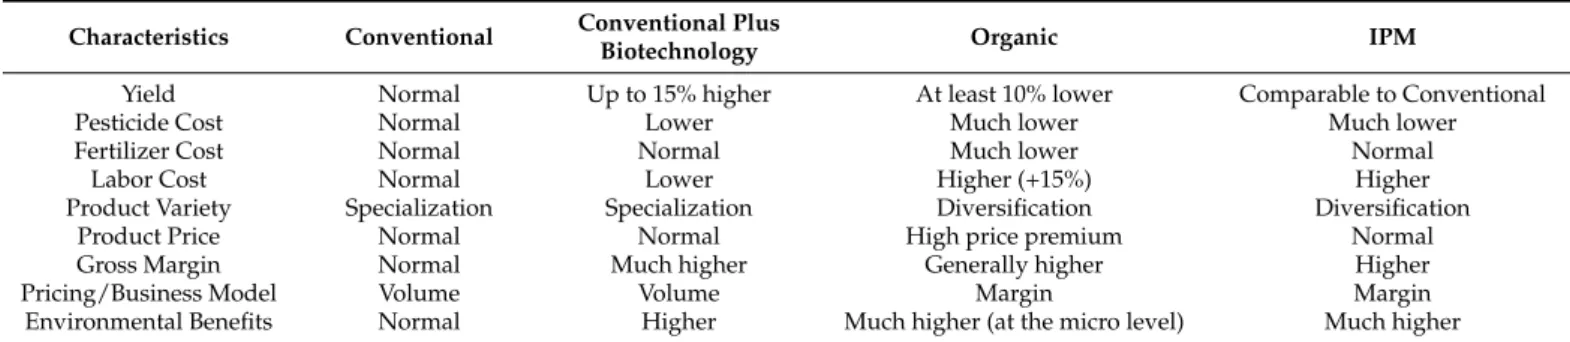 Table 1 provides a summary of the major characteristics of these different crop pro- pro-duction systems.